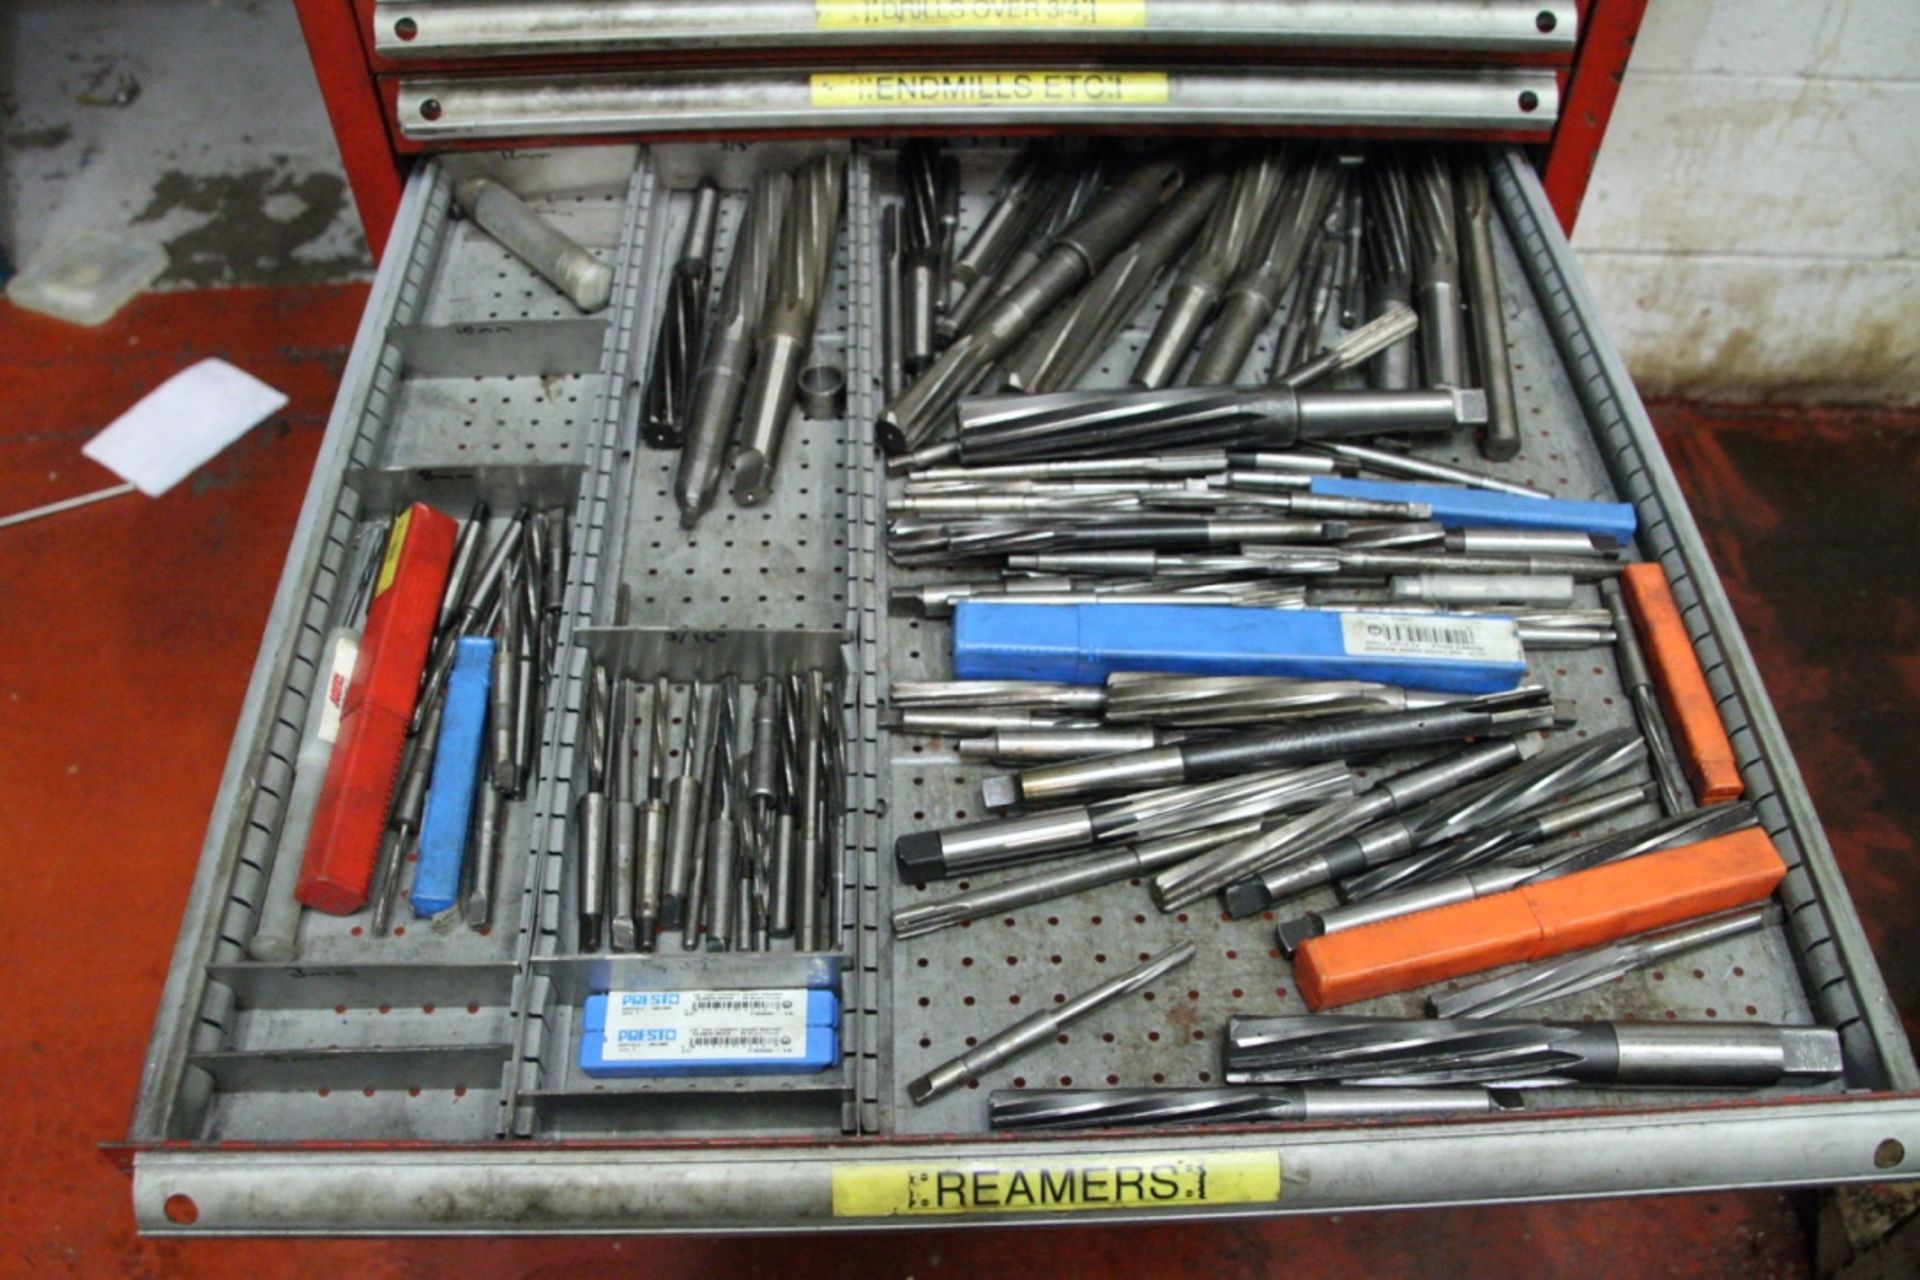 MULTI-DRAWER STEEL MOBILE CABINET, with contents including drills, inserts and machine tooling, with - Image 10 of 22